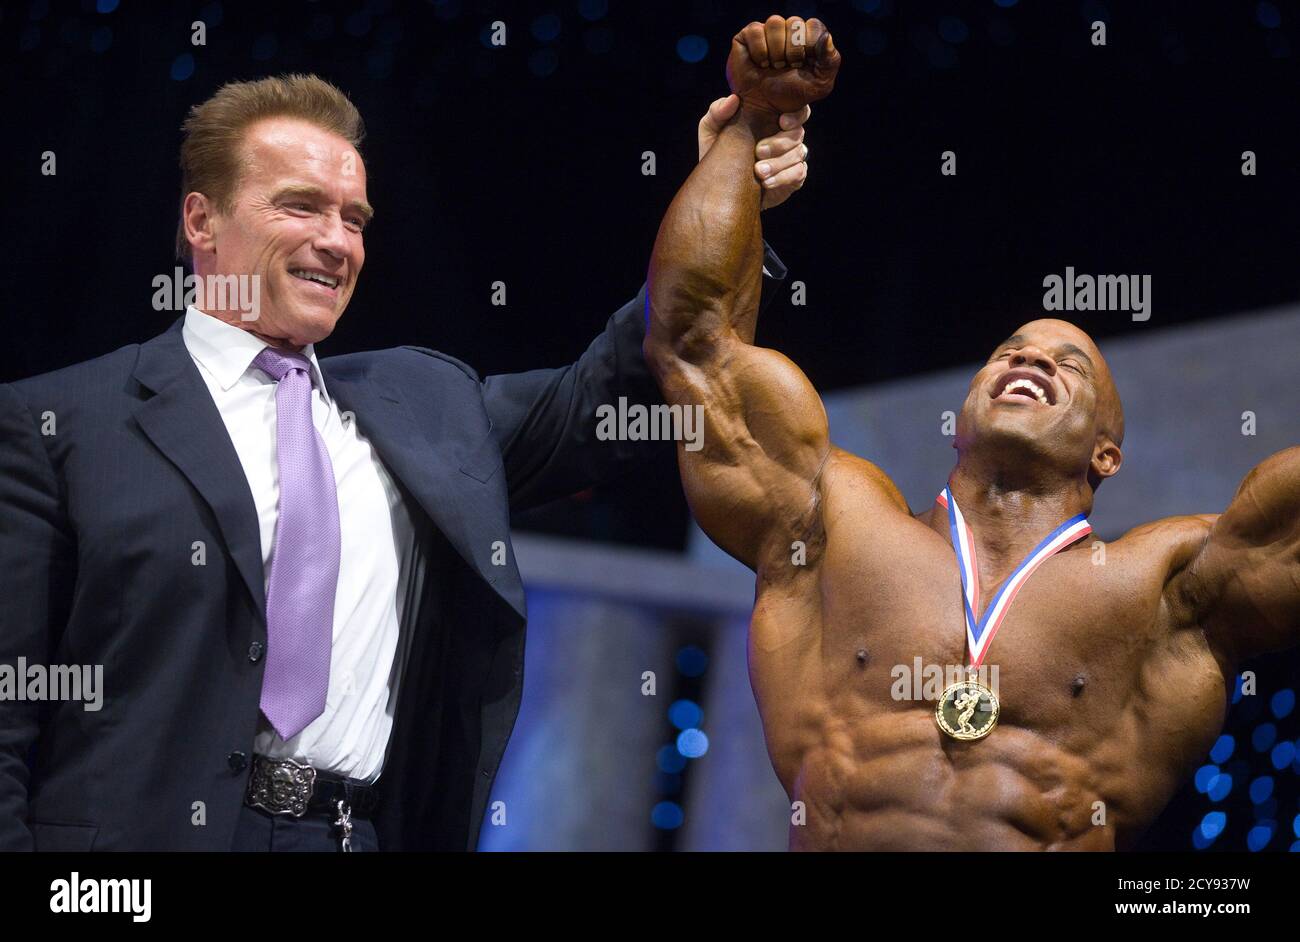 Former champion bodybuilder and former California governor Arnold Schwarzenegger (L) raises the arm of Dominican bodybuilder Victor Martinez after he won the inaugural Arnold Europe bodybuilding event in Madrid October 8,